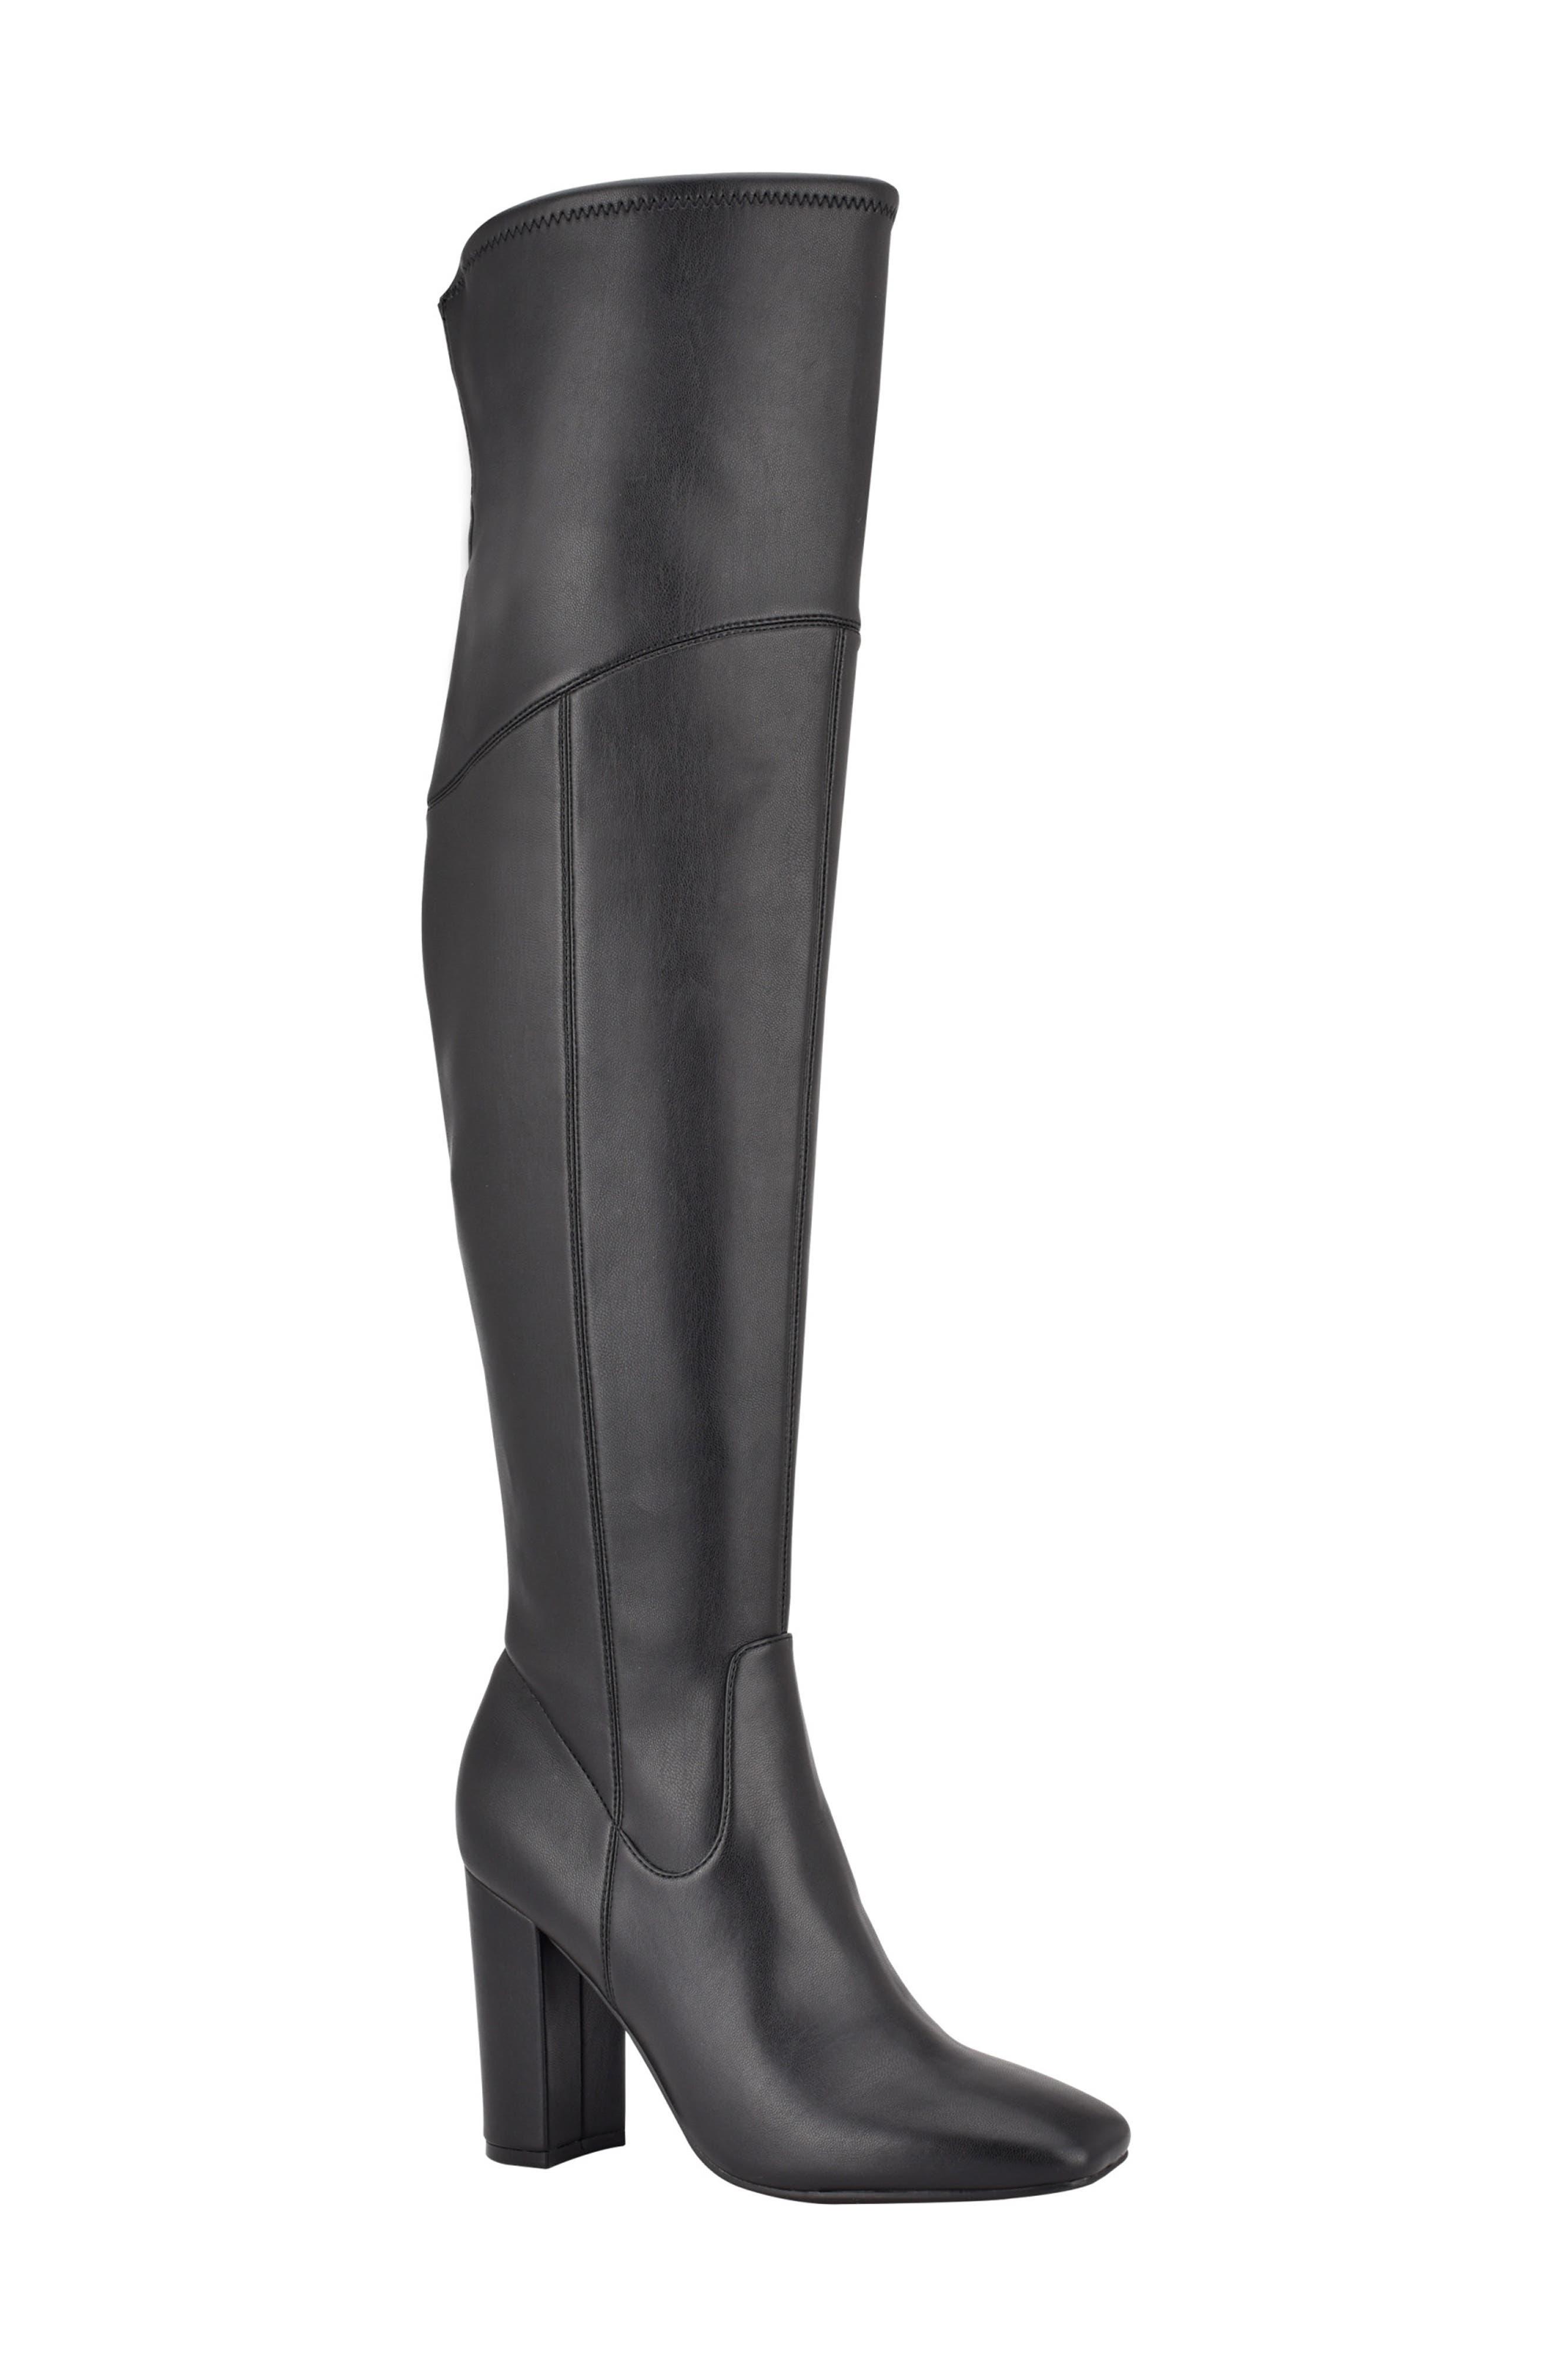 Guess Mireya Over The Knee Boot in Black | Lyst